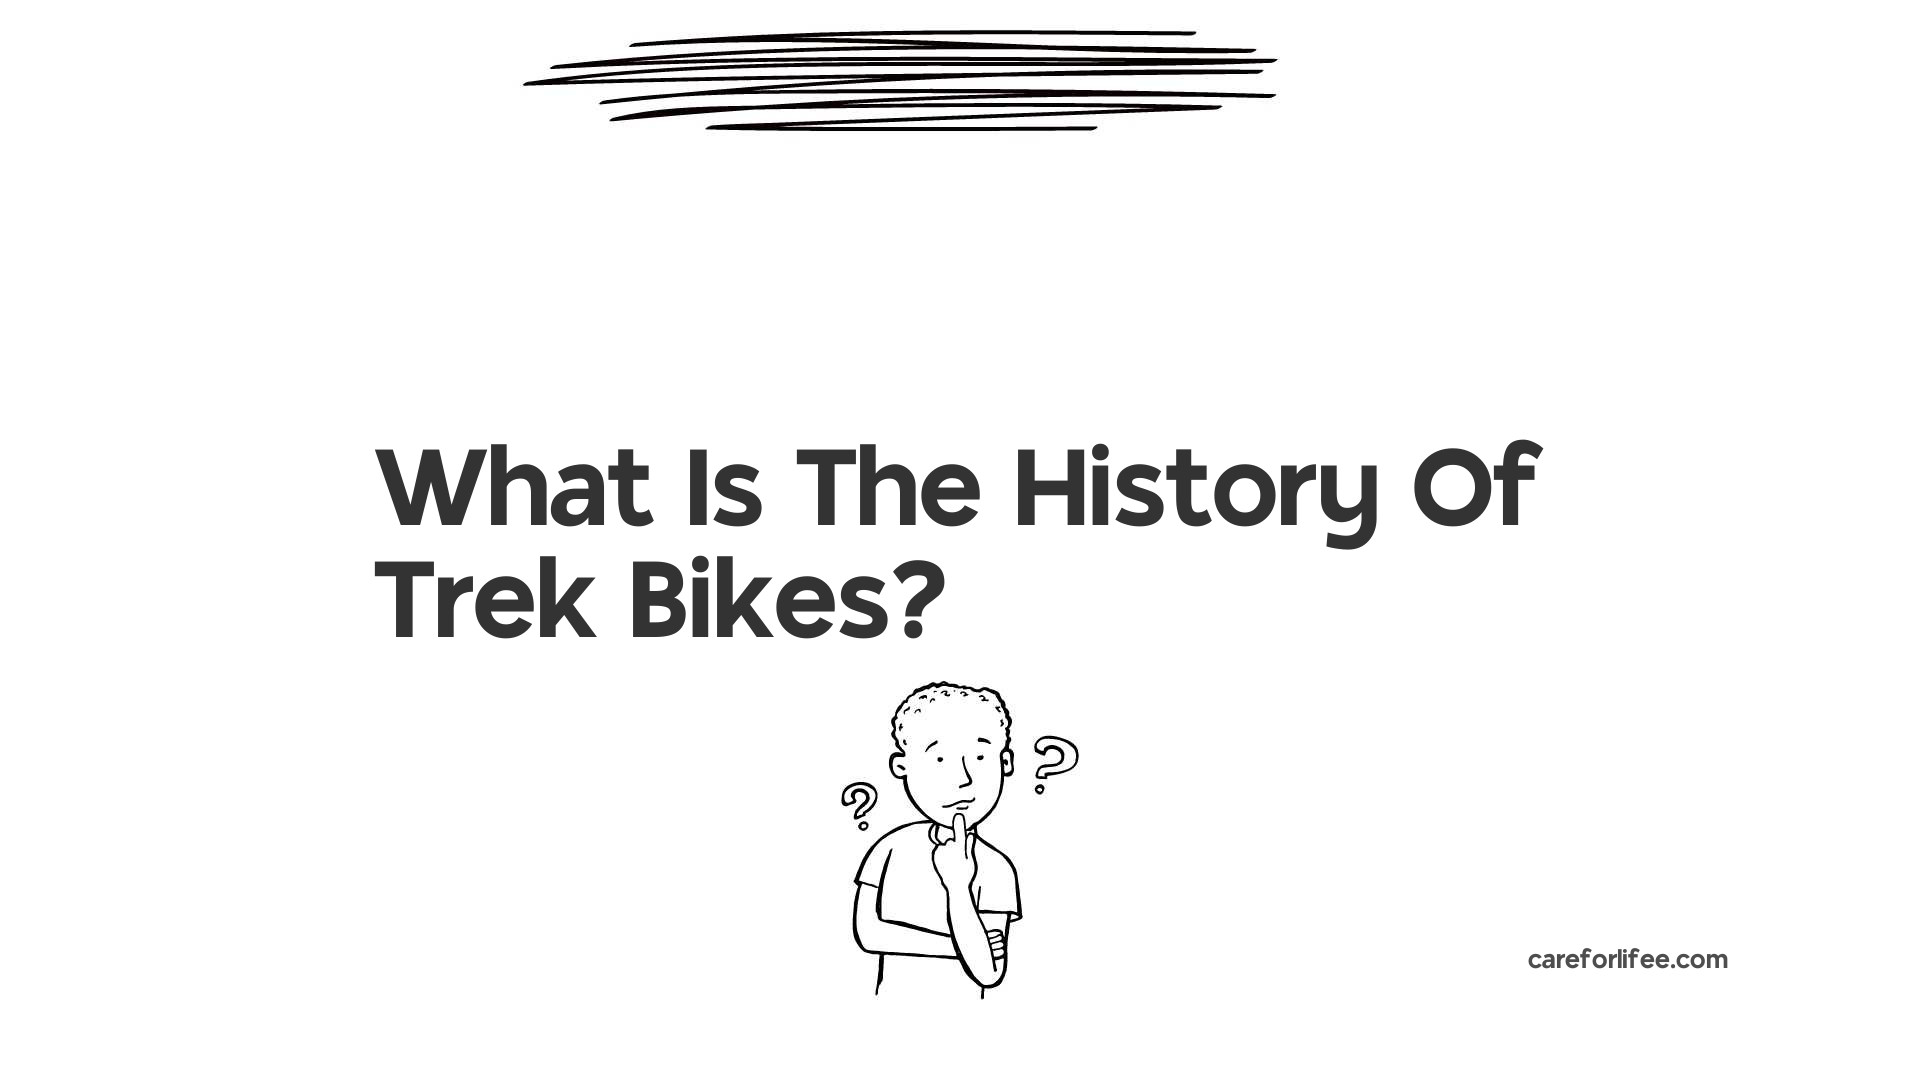 What Is The History Of Trek Bikes?